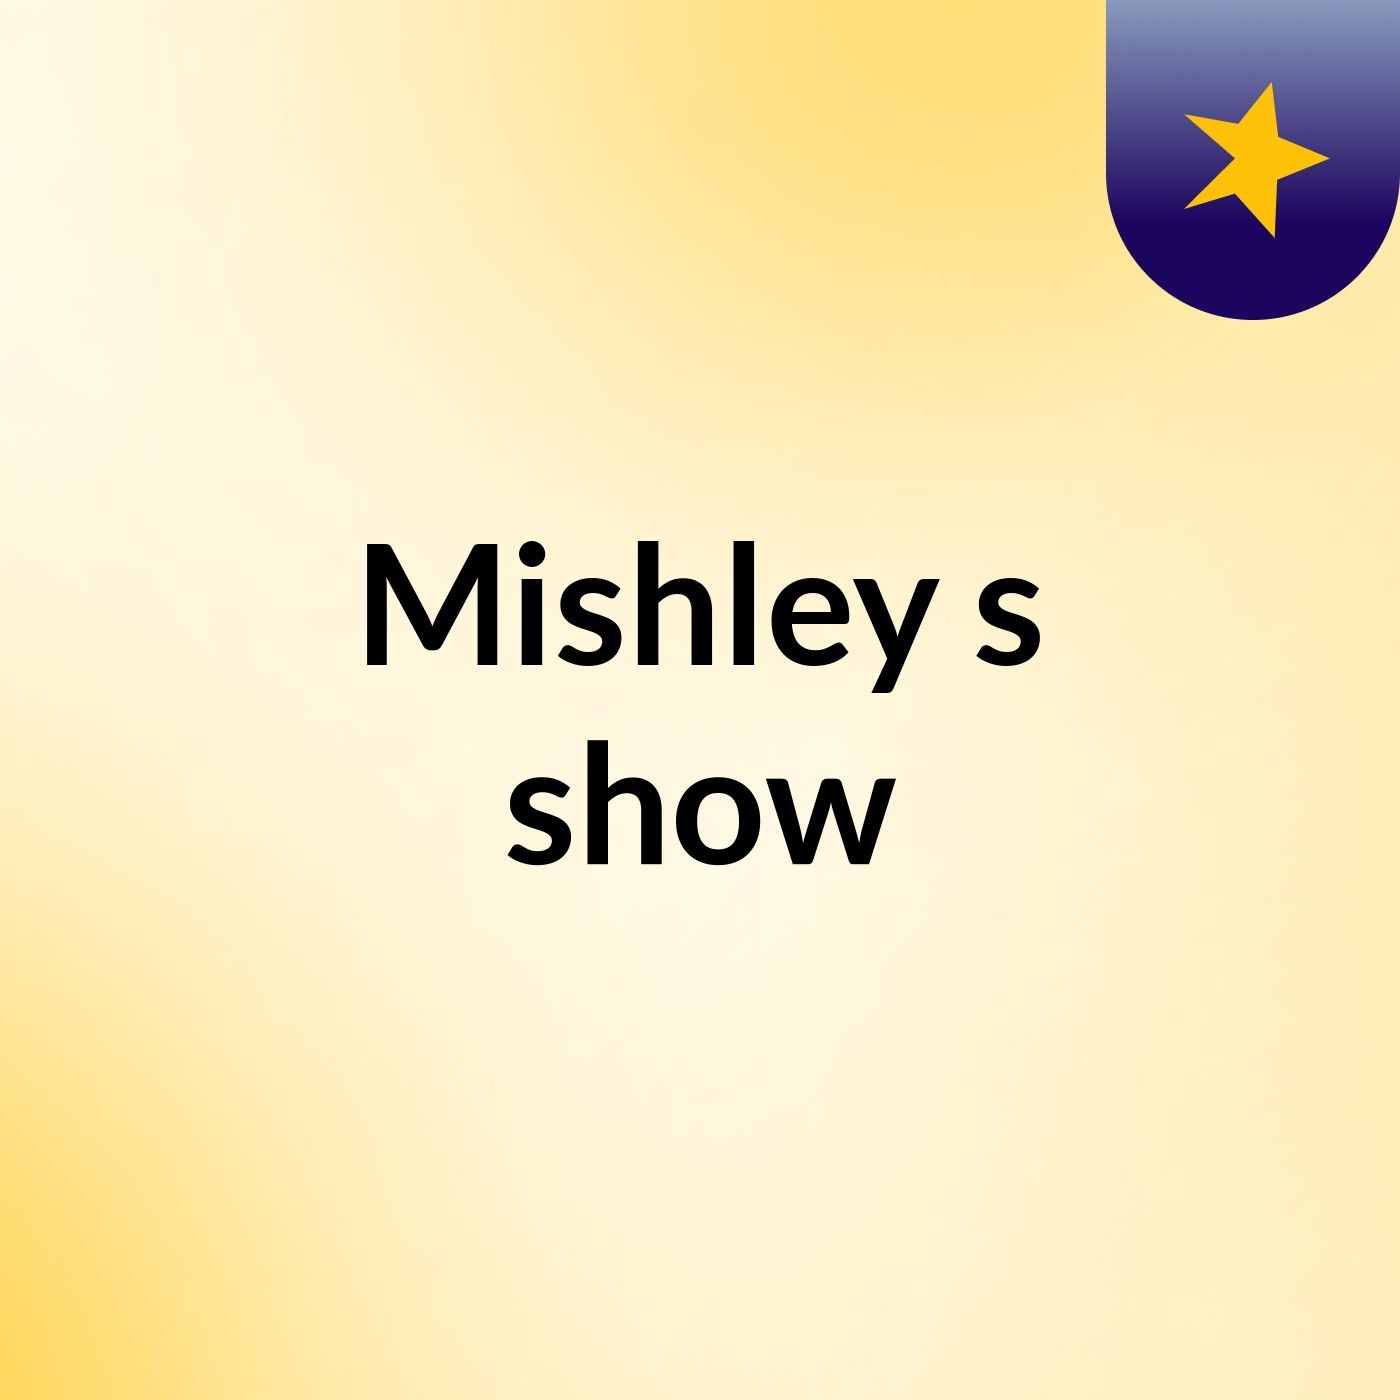 Mishley's show